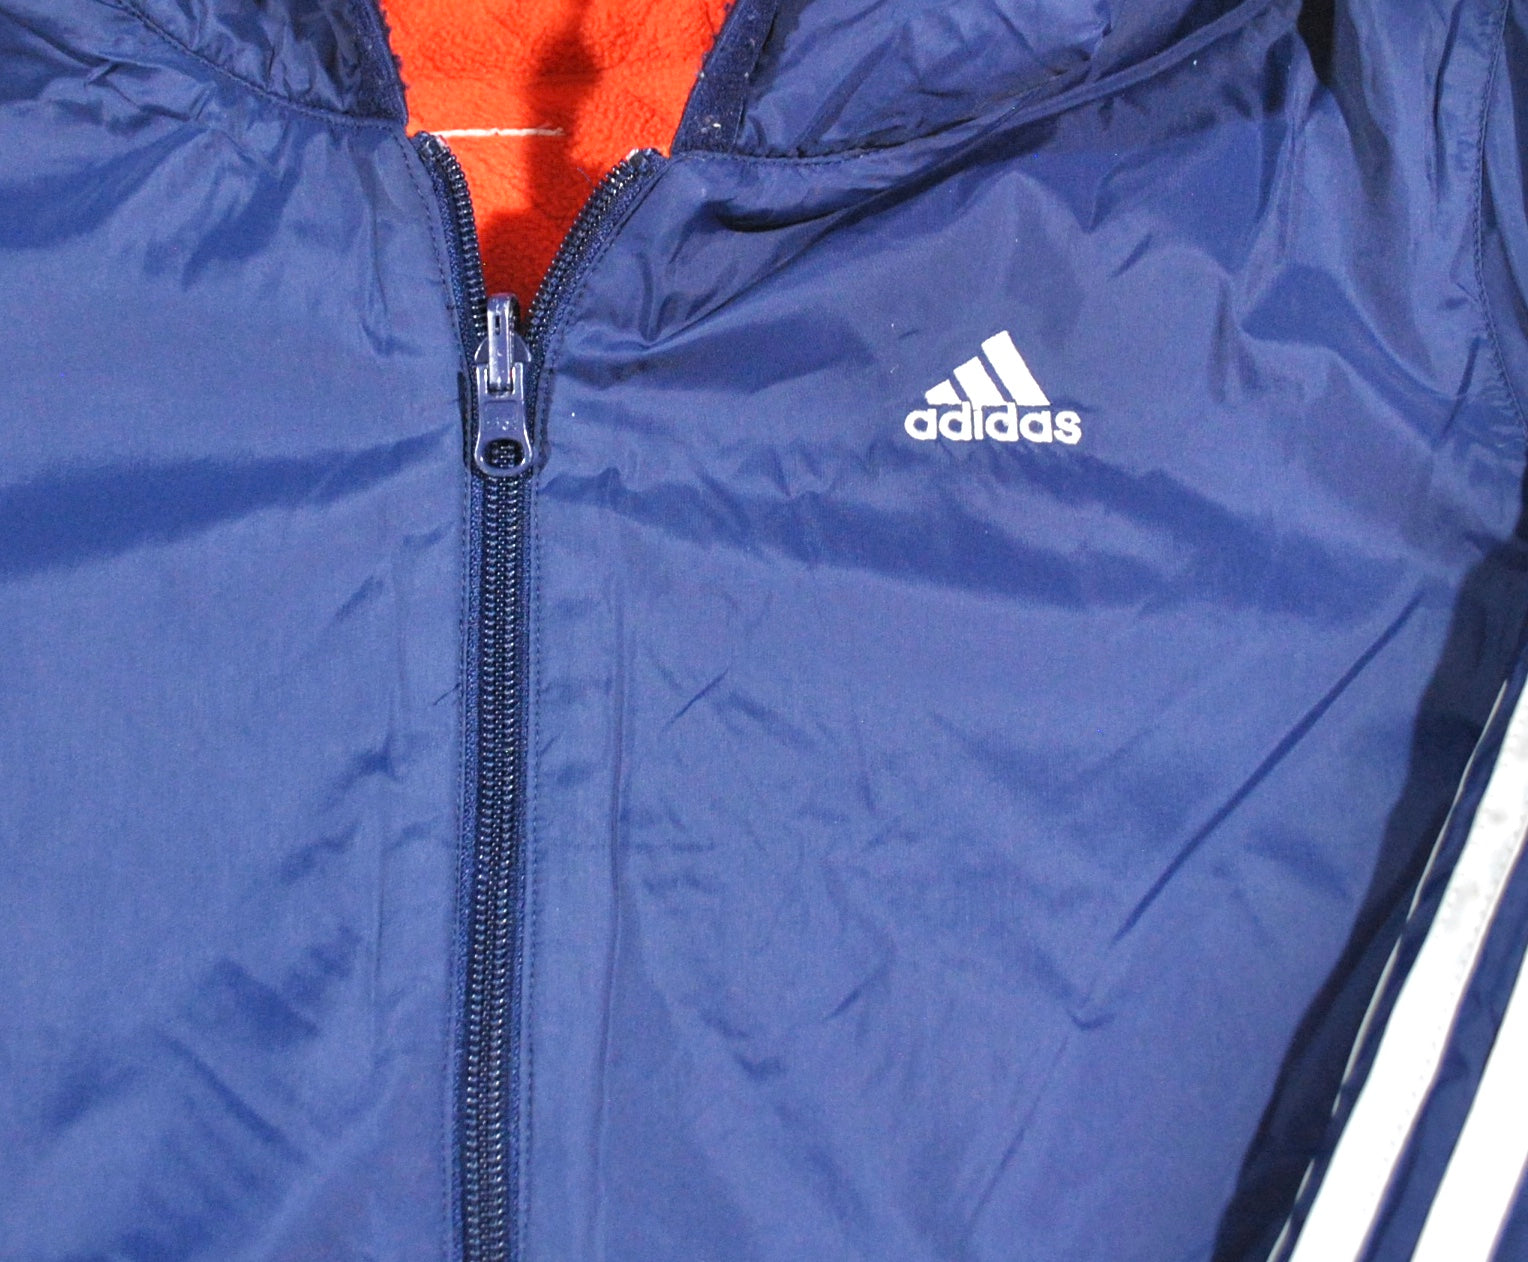 Adidas Reversible Jacket Size Small – Yesterday's Attic